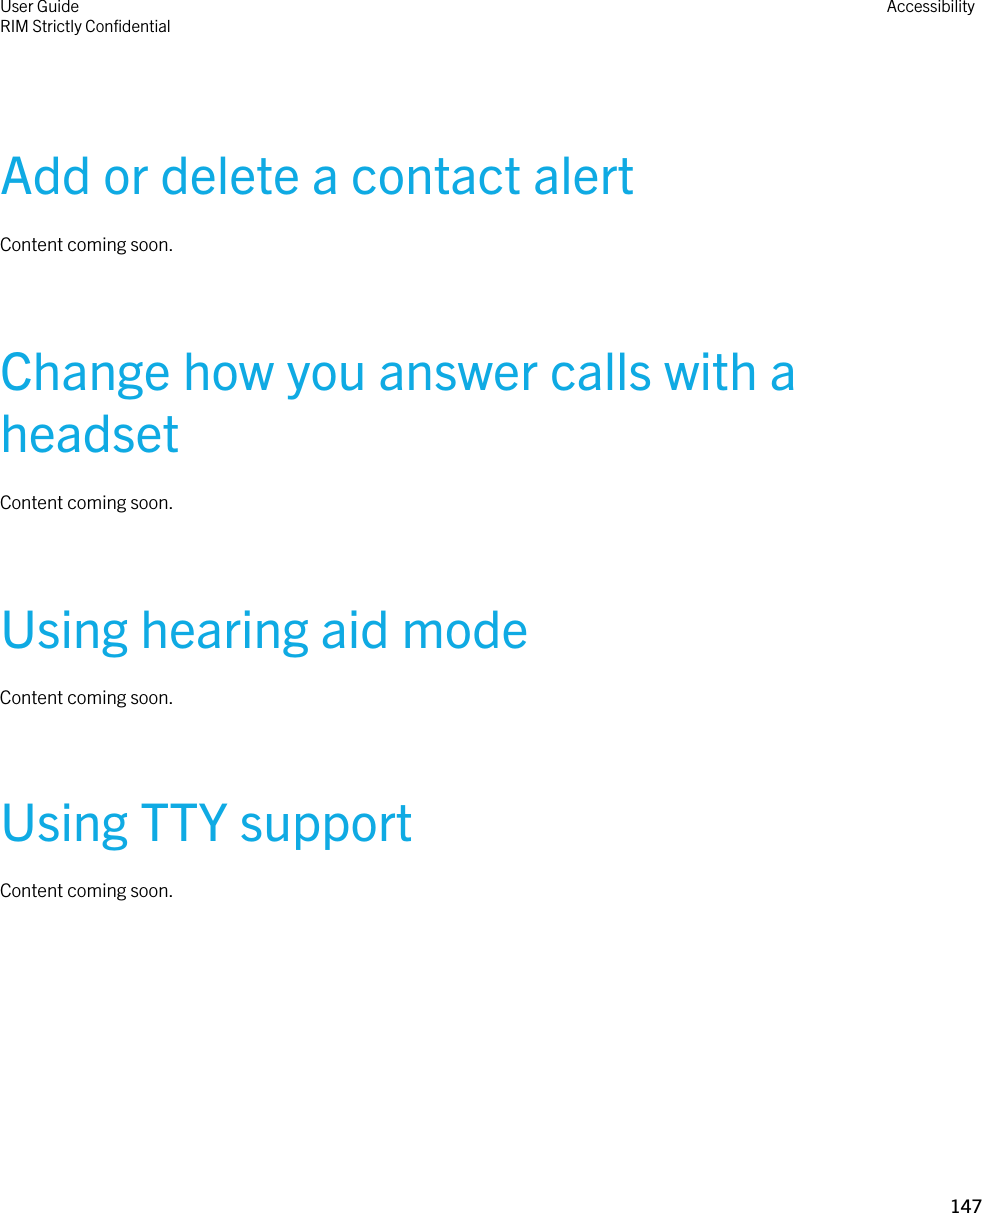 Add or delete a contact alertContent coming soon.Change how you answer calls with a headsetContent coming soon.Using hearing aid modeContent coming soon.Using TTY supportContent coming soon.User GuideRIM Strictly ConfidentialAccessibility147 